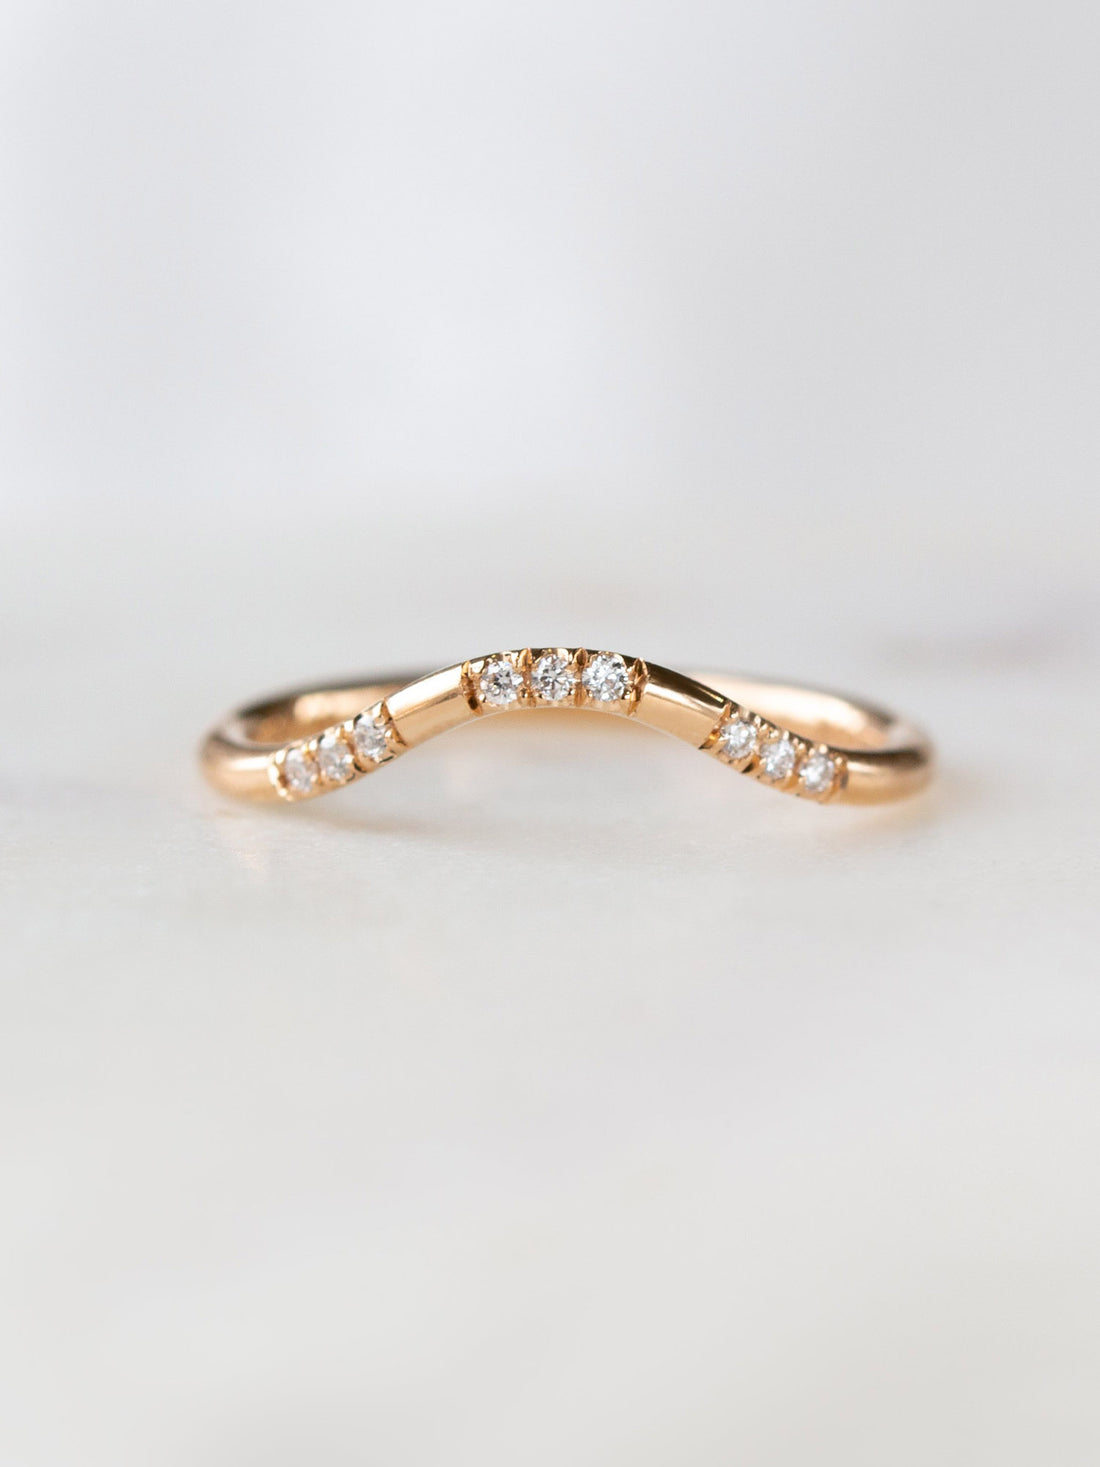 hiddenspace jewelry fine jewelry los angeles art deco design architectural fine jewelry wedding band stacking rings stackable band 14k gold ring diamond ring unique fine jewelry ADELIO BAND